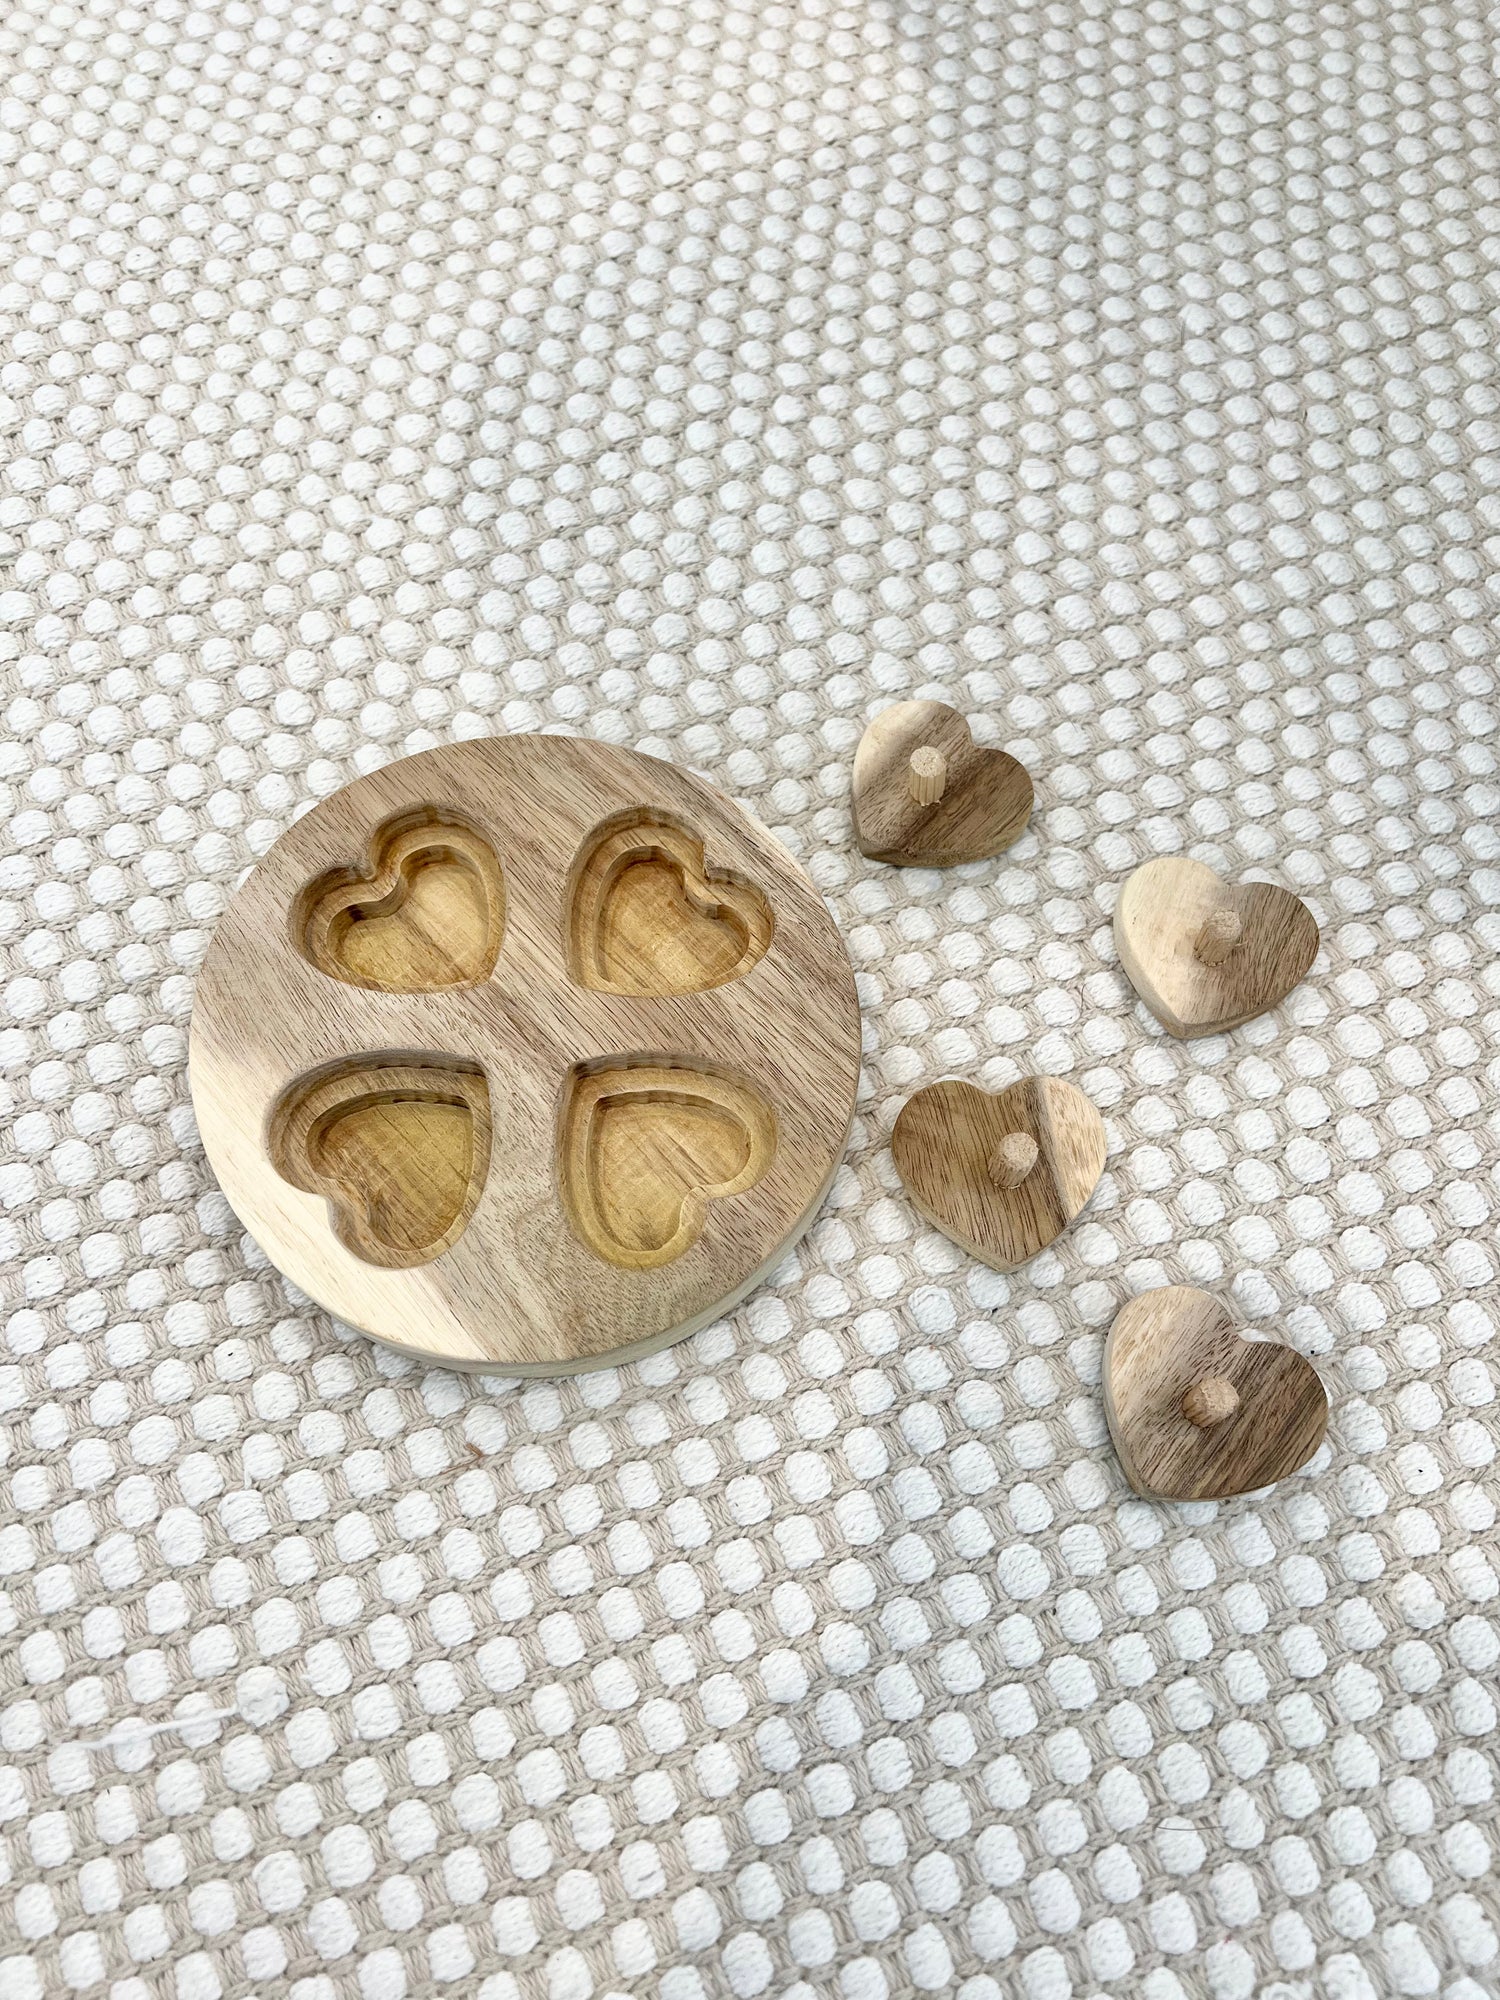 NEW! Heart Puzzle Toy